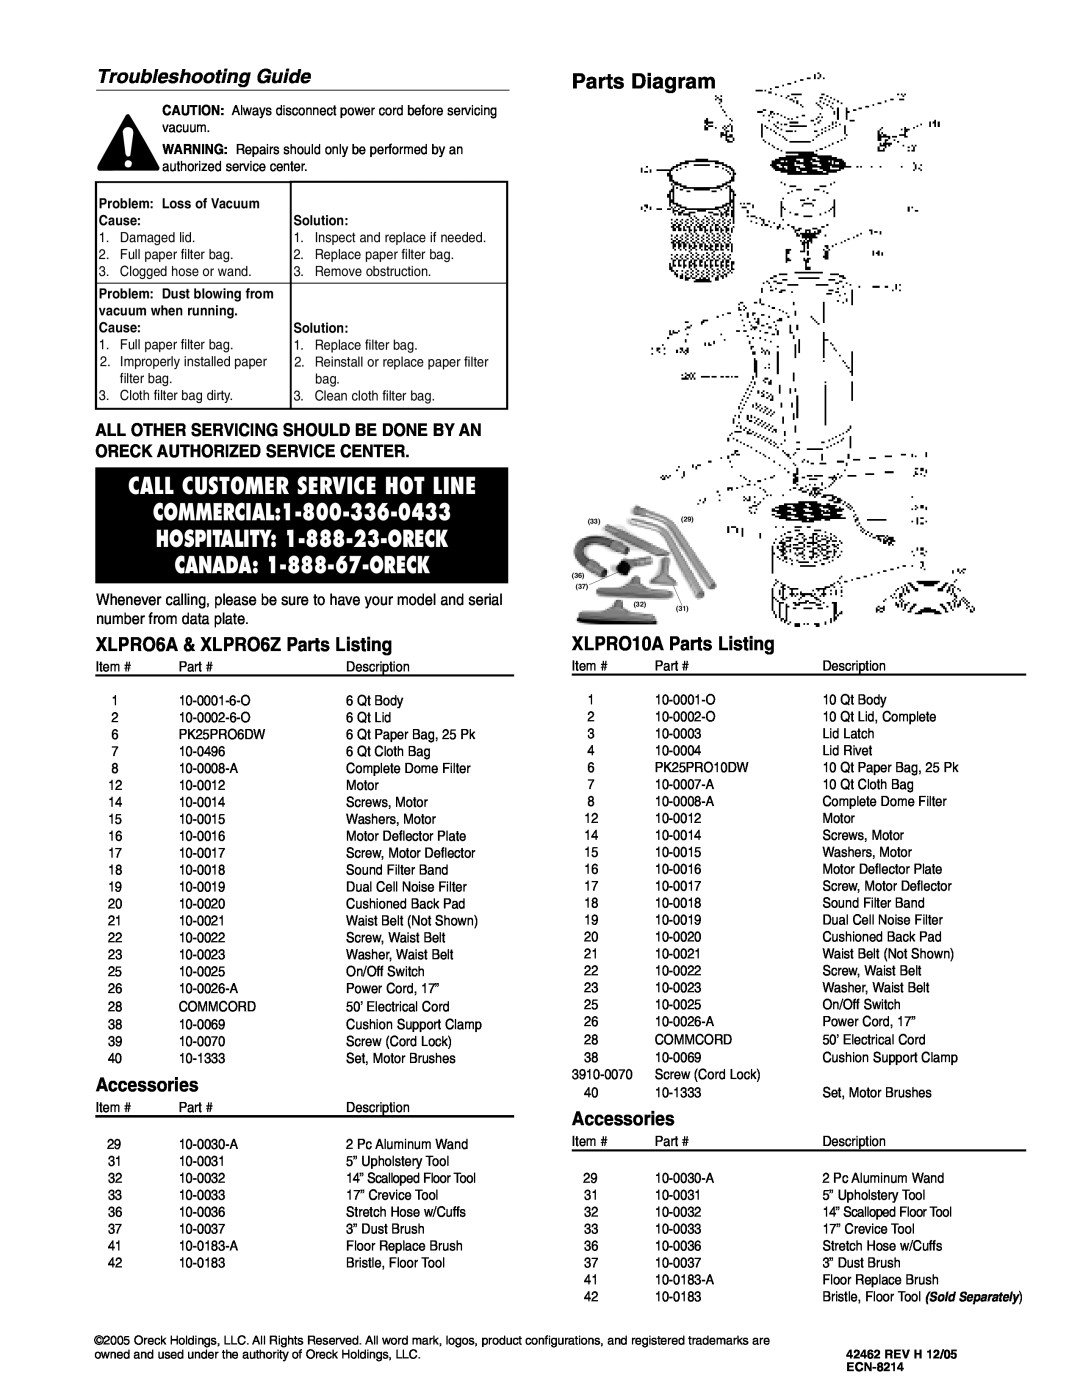 Oreck XLPRO6Z Troubleshooting Guide, Problem Loss of Vacuum, Solution, Cause, vacuum when running, CANADA 1-888-67-ORECK 